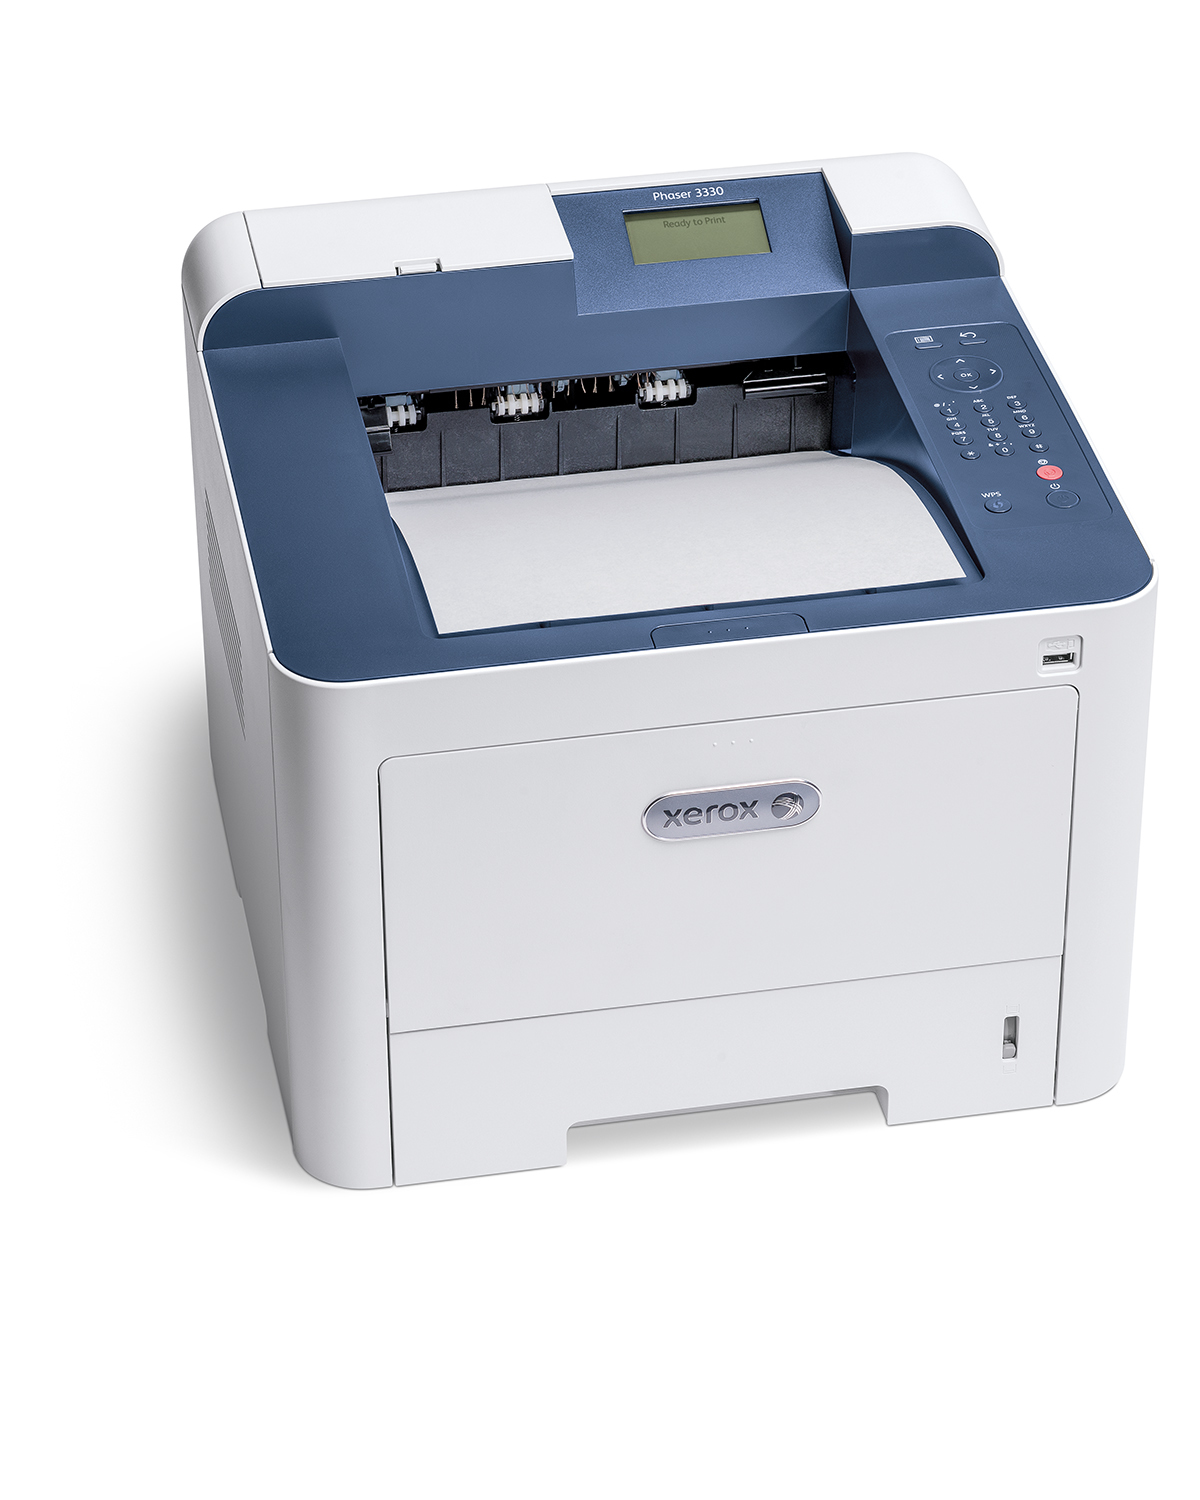 XEROX WORKCENTRE 3330 UP